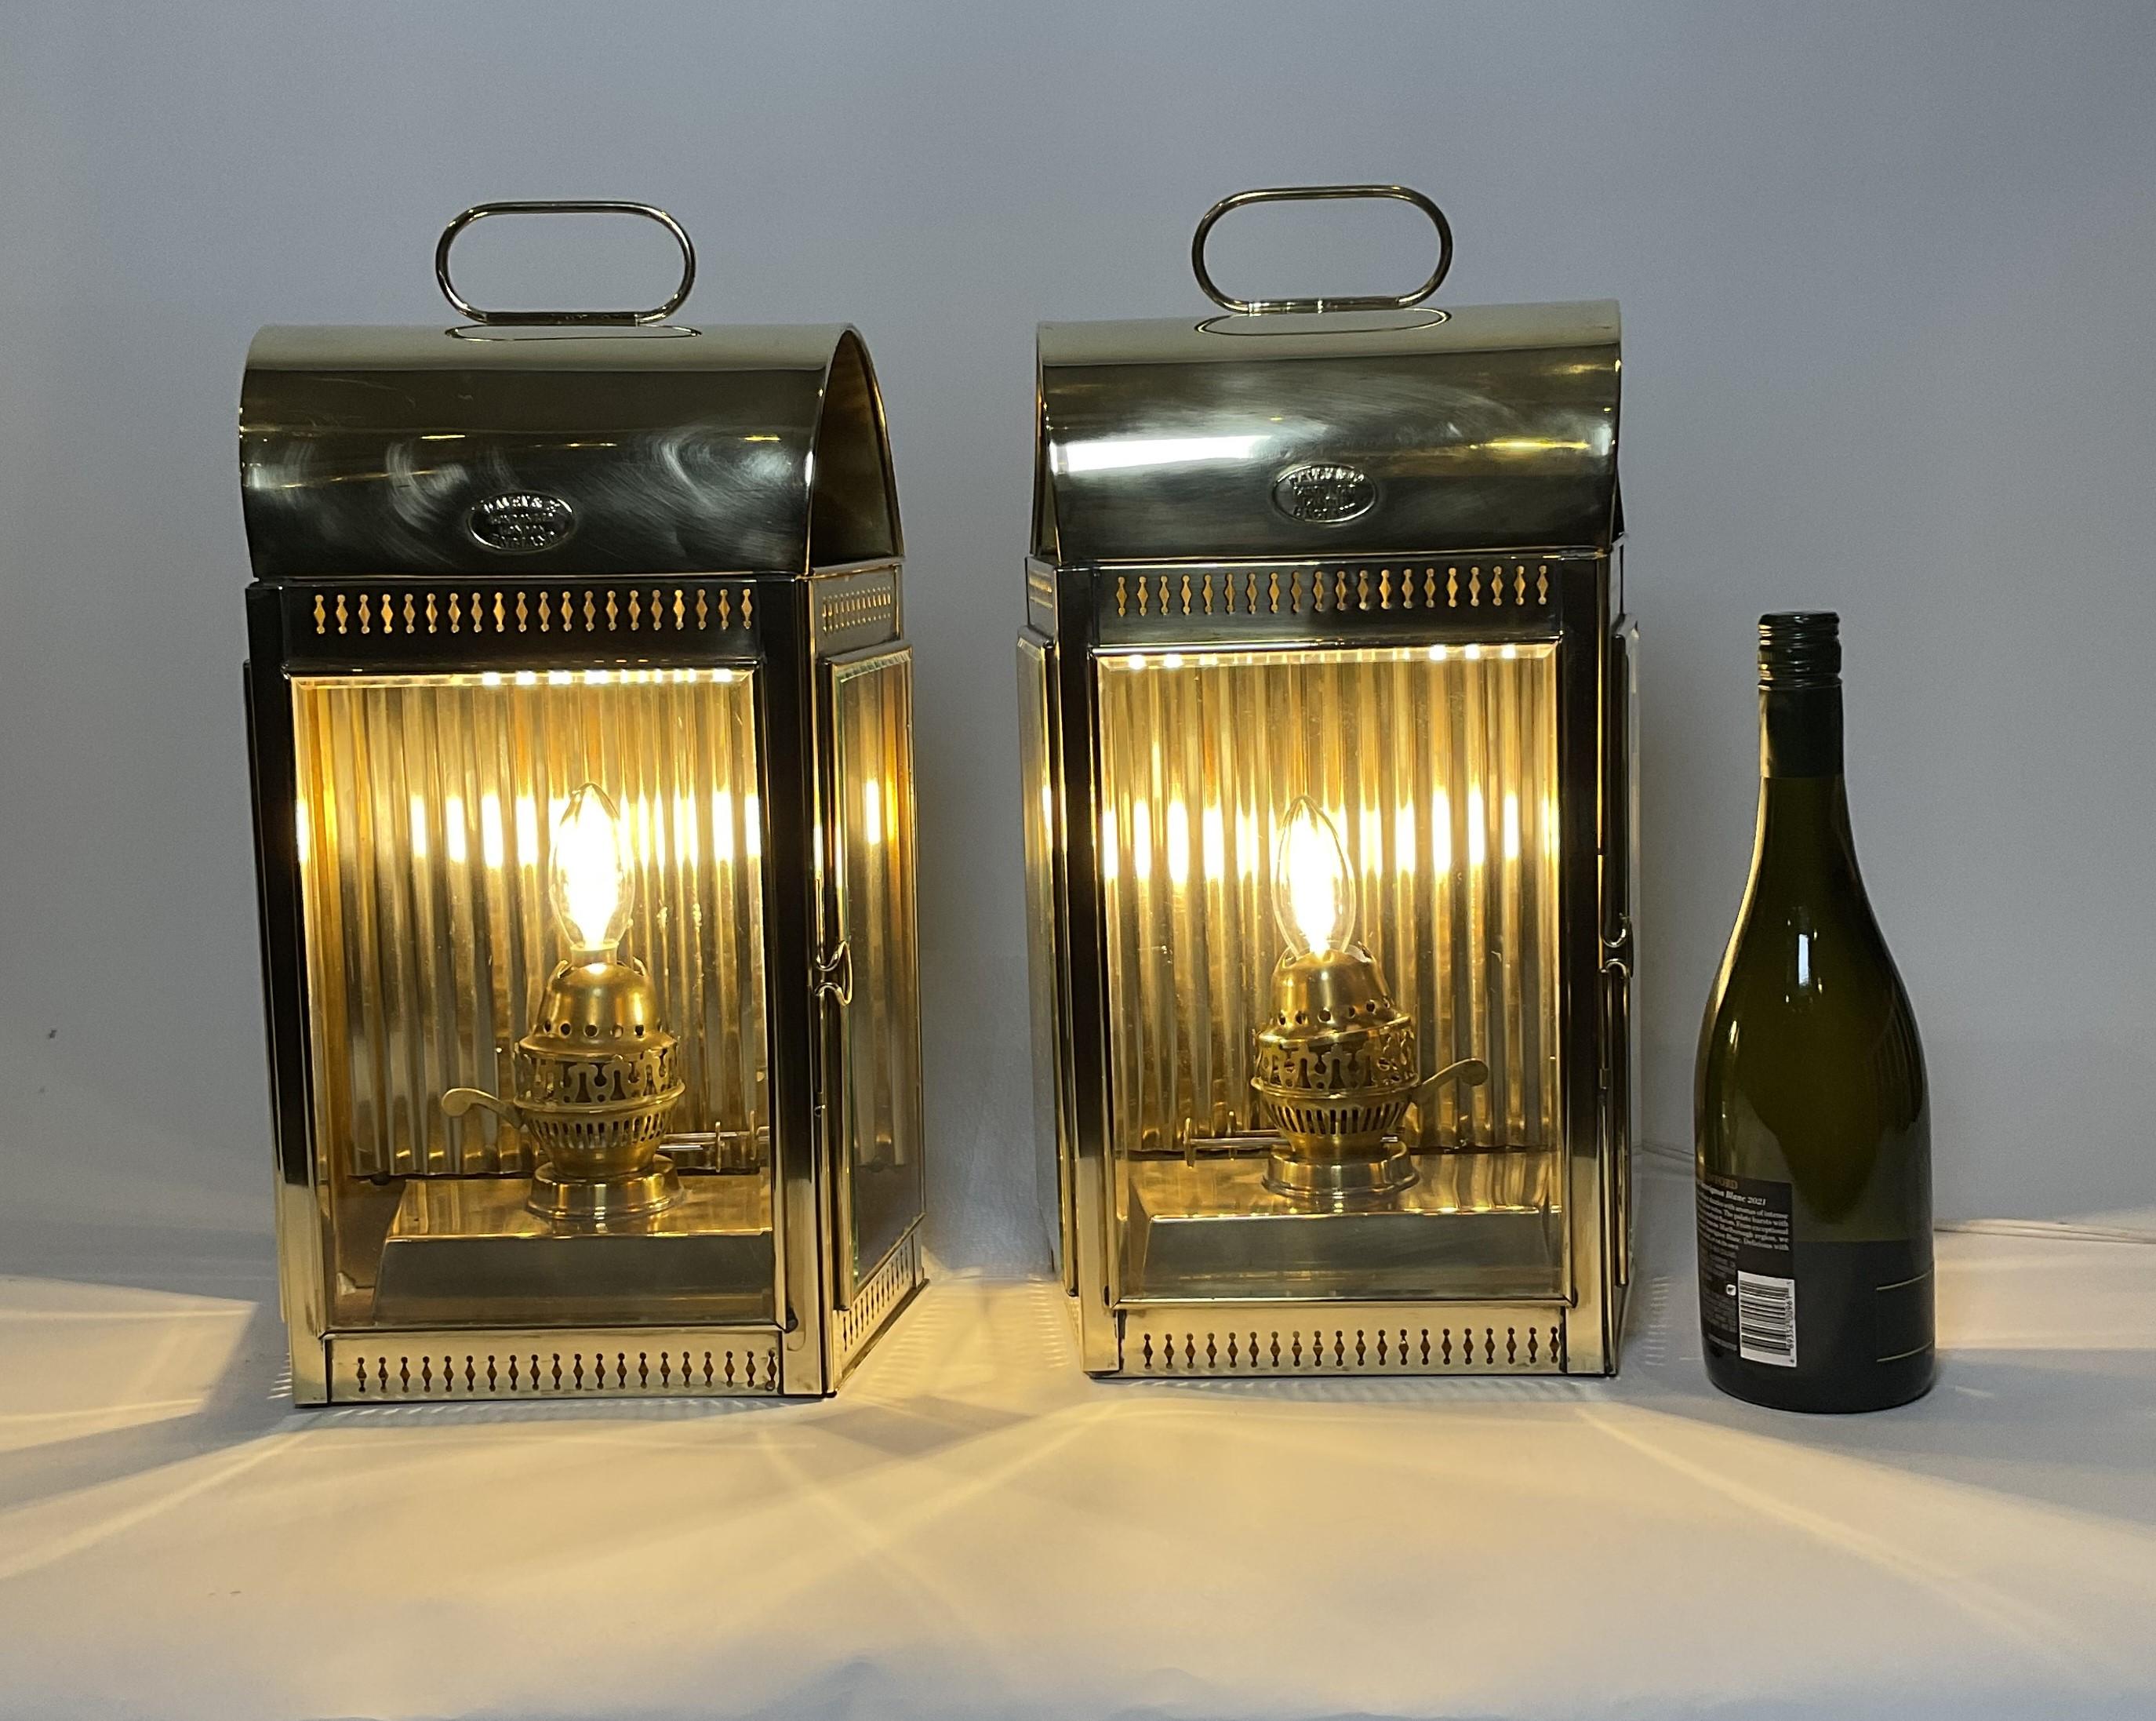 Solid brass ships cabin lanterns by Davey of London. Exceptionally large examples from Davey with three beveled glass windows, hinged doors, vented tops, carry handles. Both have house mounting brackets. Highly polished. Perfect for the front of a